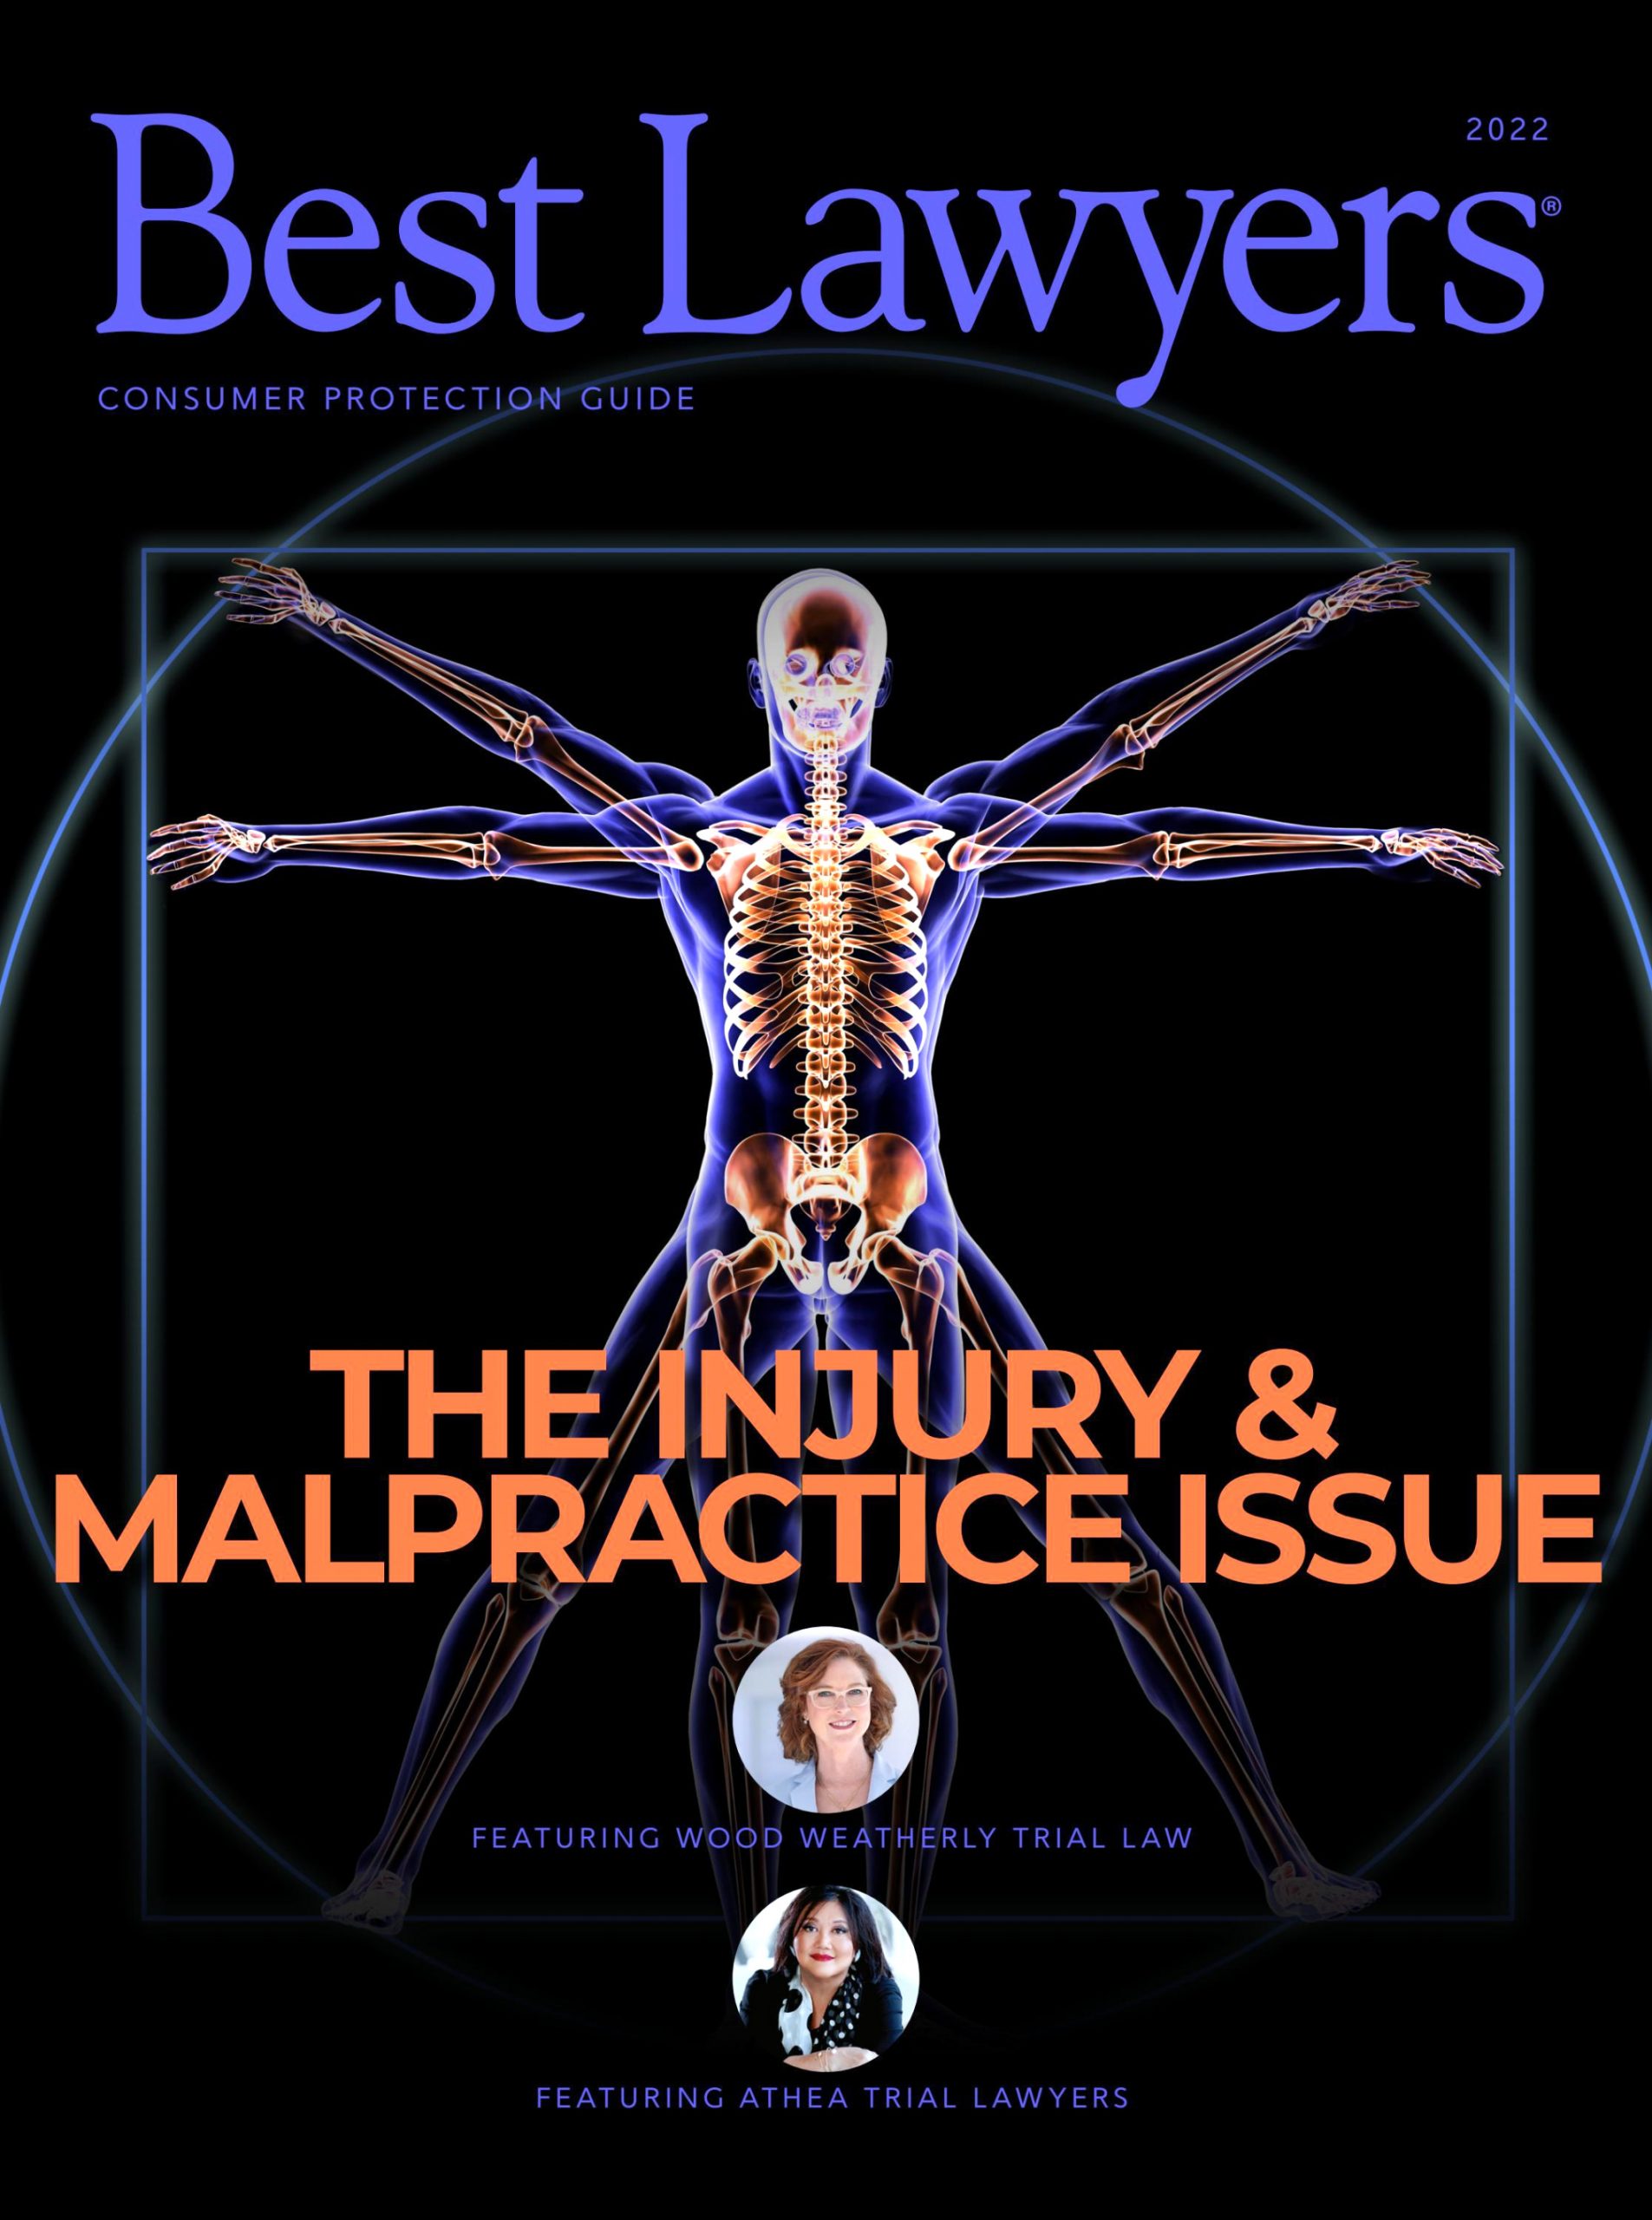 Personil Injury Lawyer In Newton Ms Dans Best Lawyers: the Injury & Malpractice issue 2022 by Best Lawyers ...